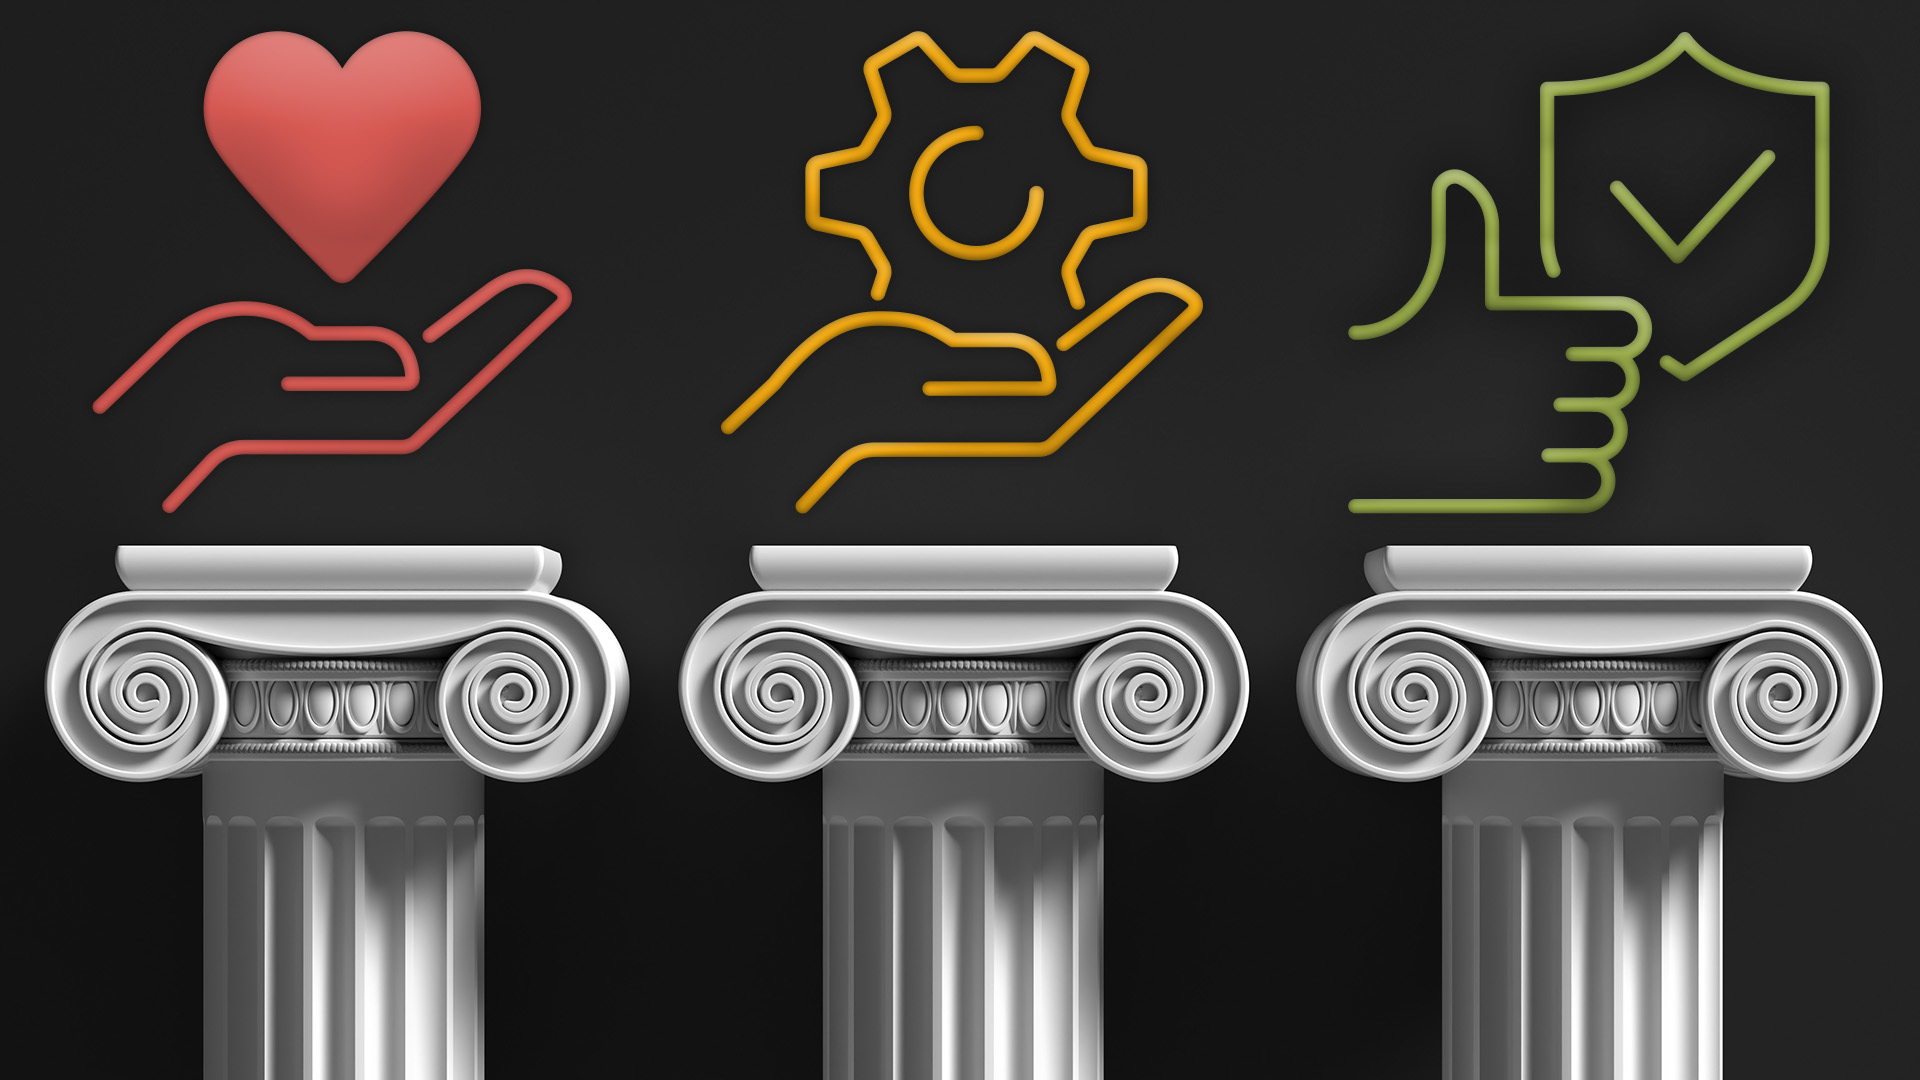 Managed Service Providers and the Three Pillars of Trustworthiness